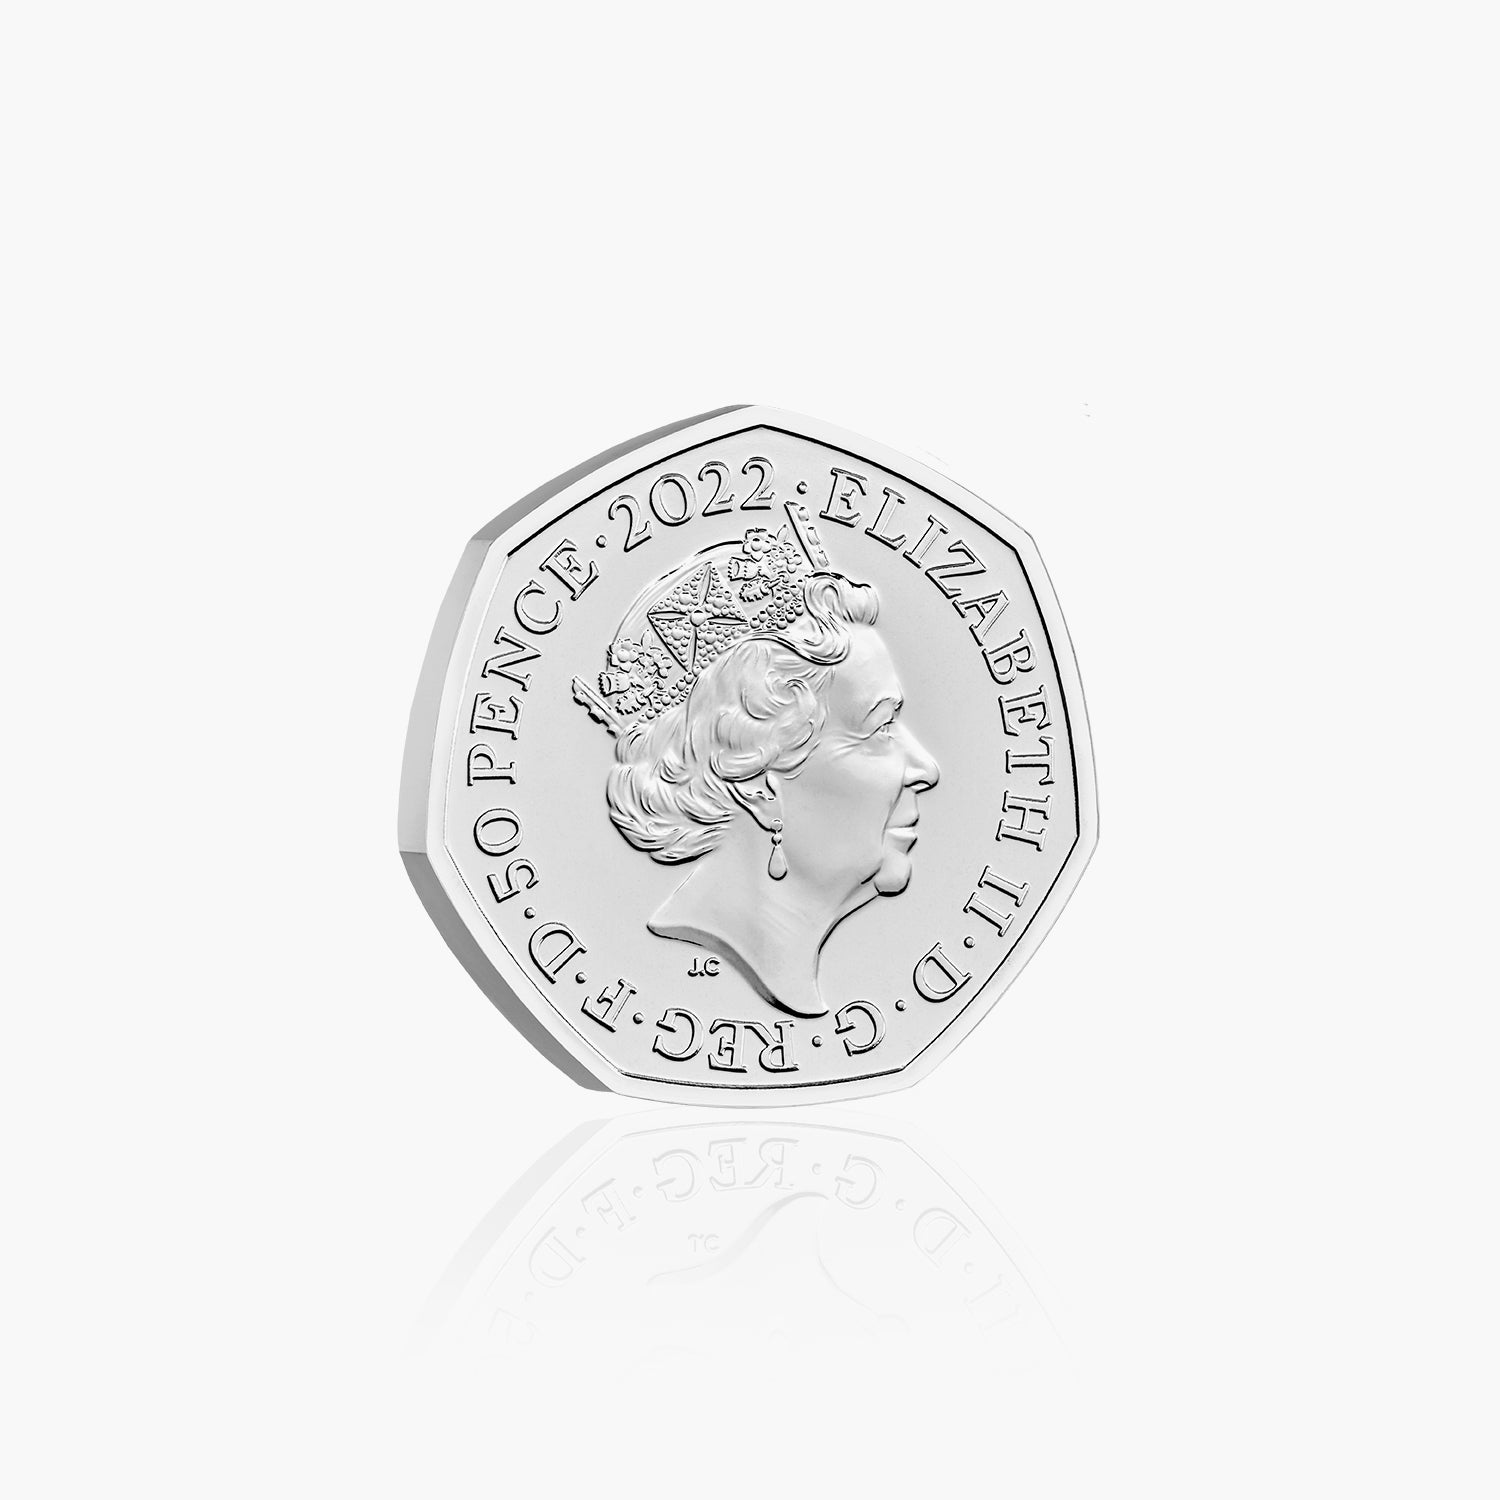 Harry Potter 2022 UK 50p Brilliant Uncirculated Coin